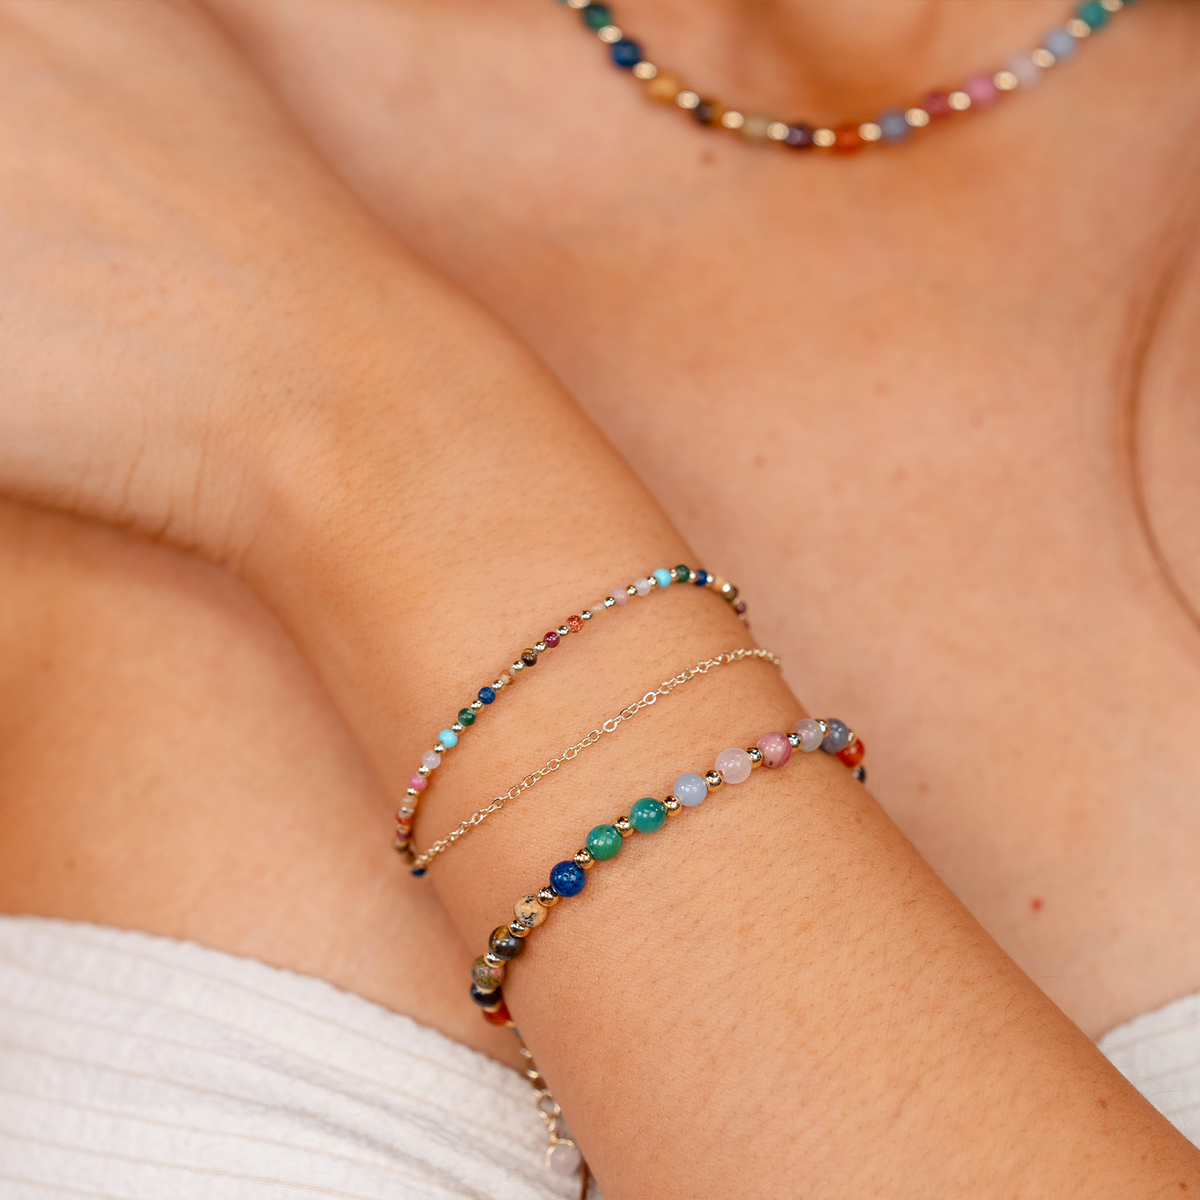 Model wearing a stack of two healing bracelets. The bracelets include a 4mm multicolor stone and gold bead healing bracelet and a 2mm multicolor stone and gold bead healing bracelet